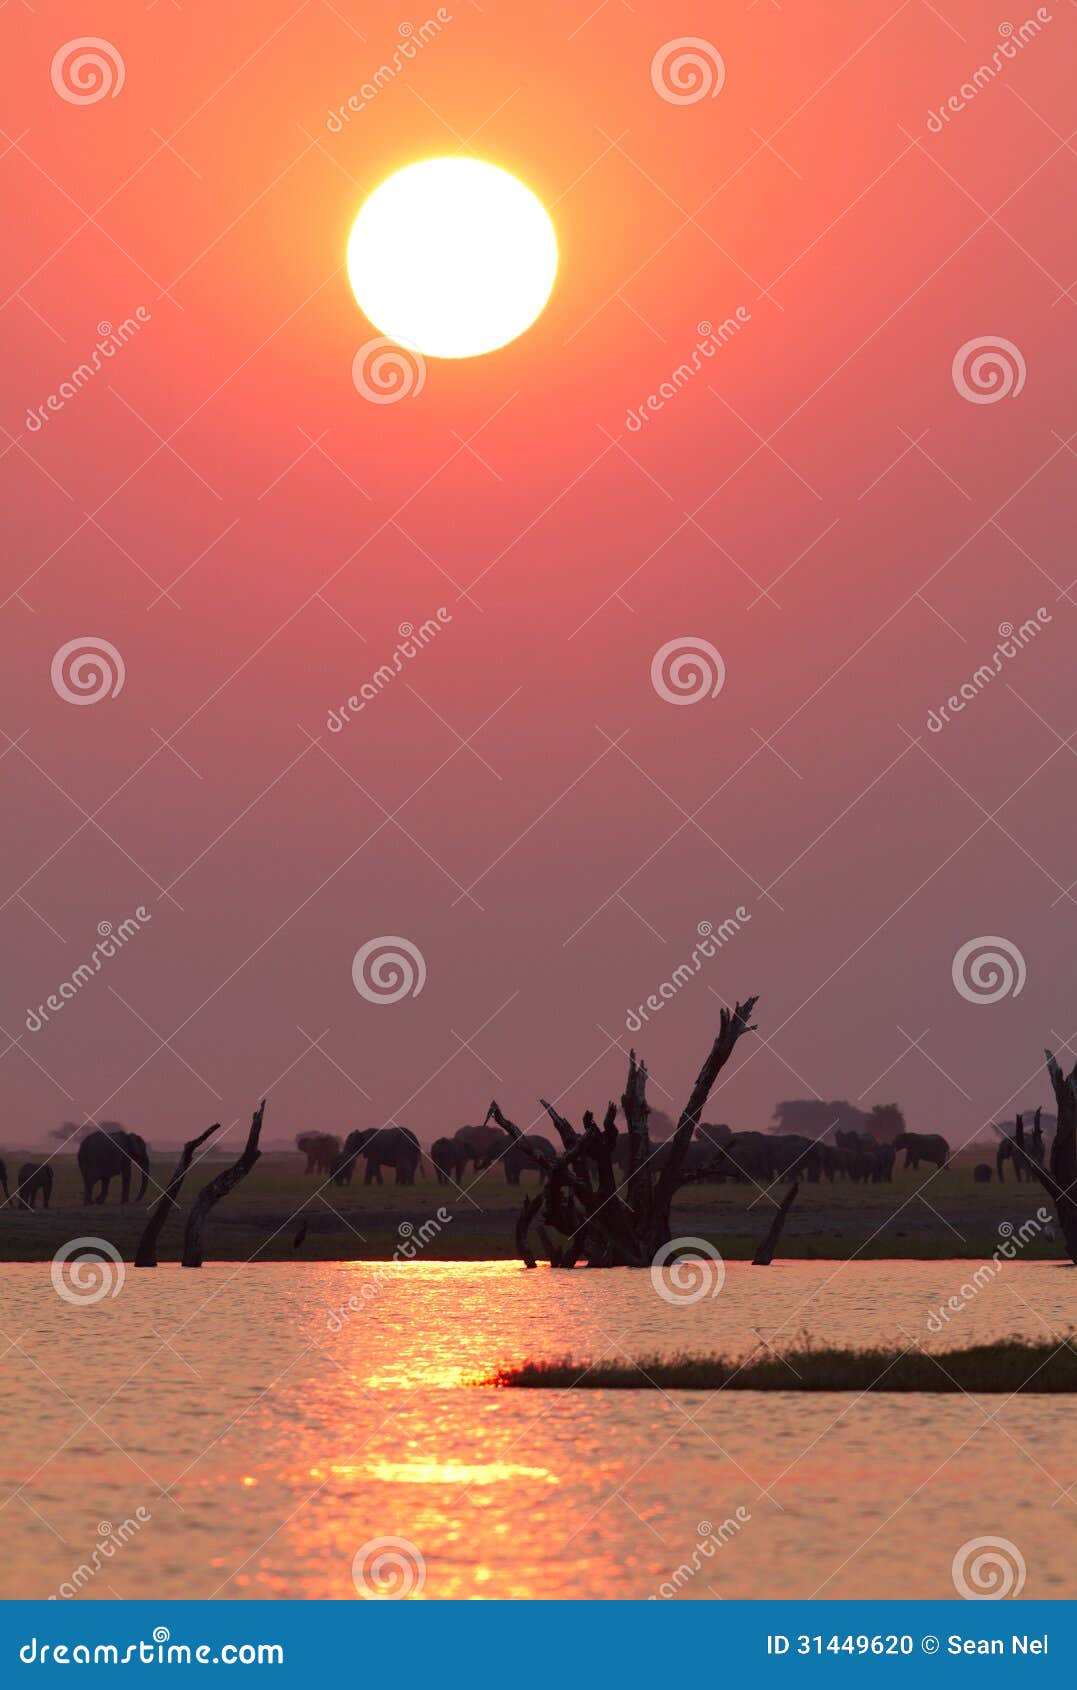 African Sunset stock photo. Image of namibia, wilderness - 31449620